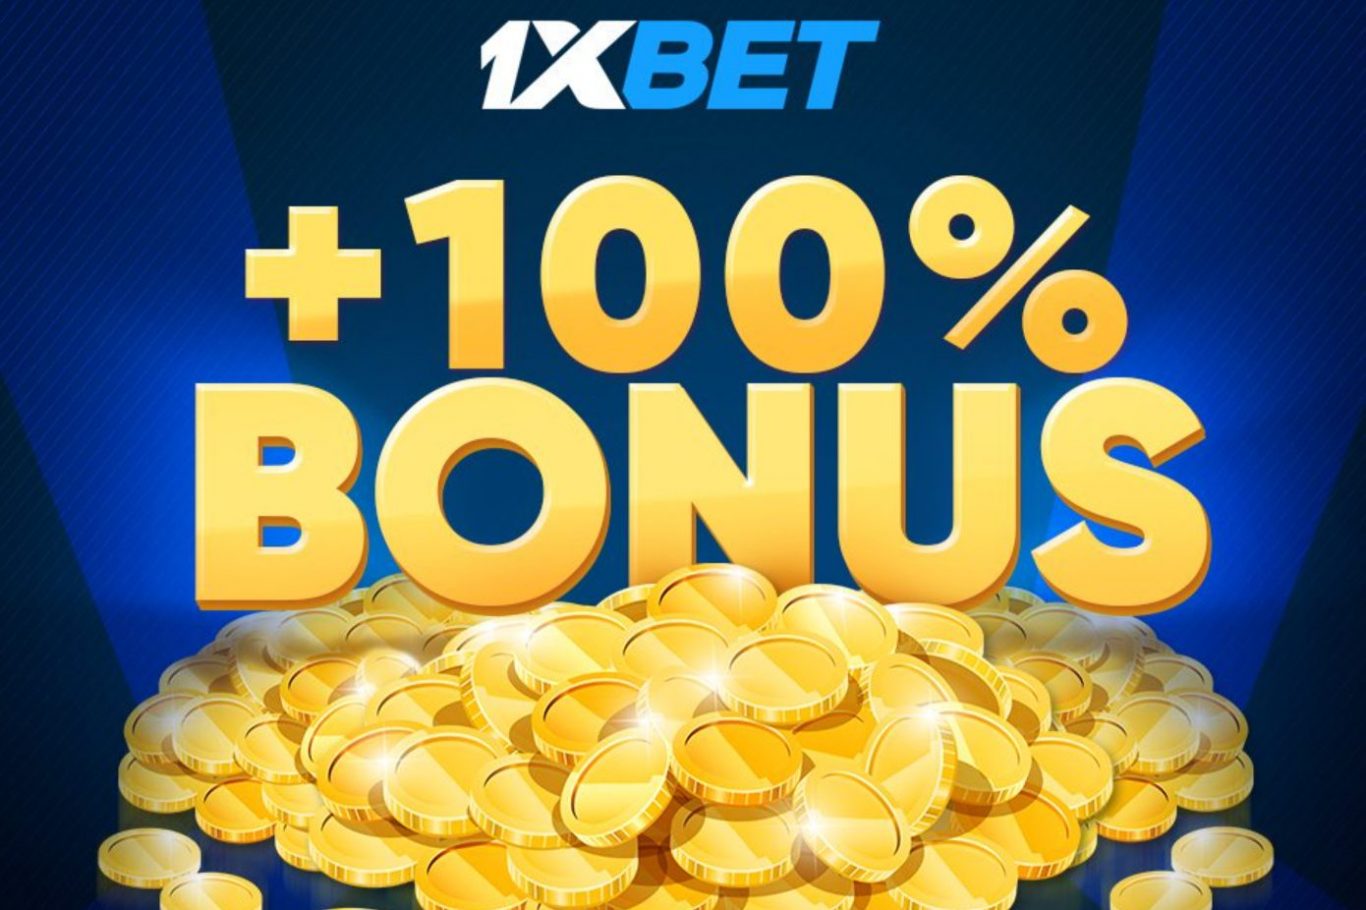 What Makes 1xBet That Different